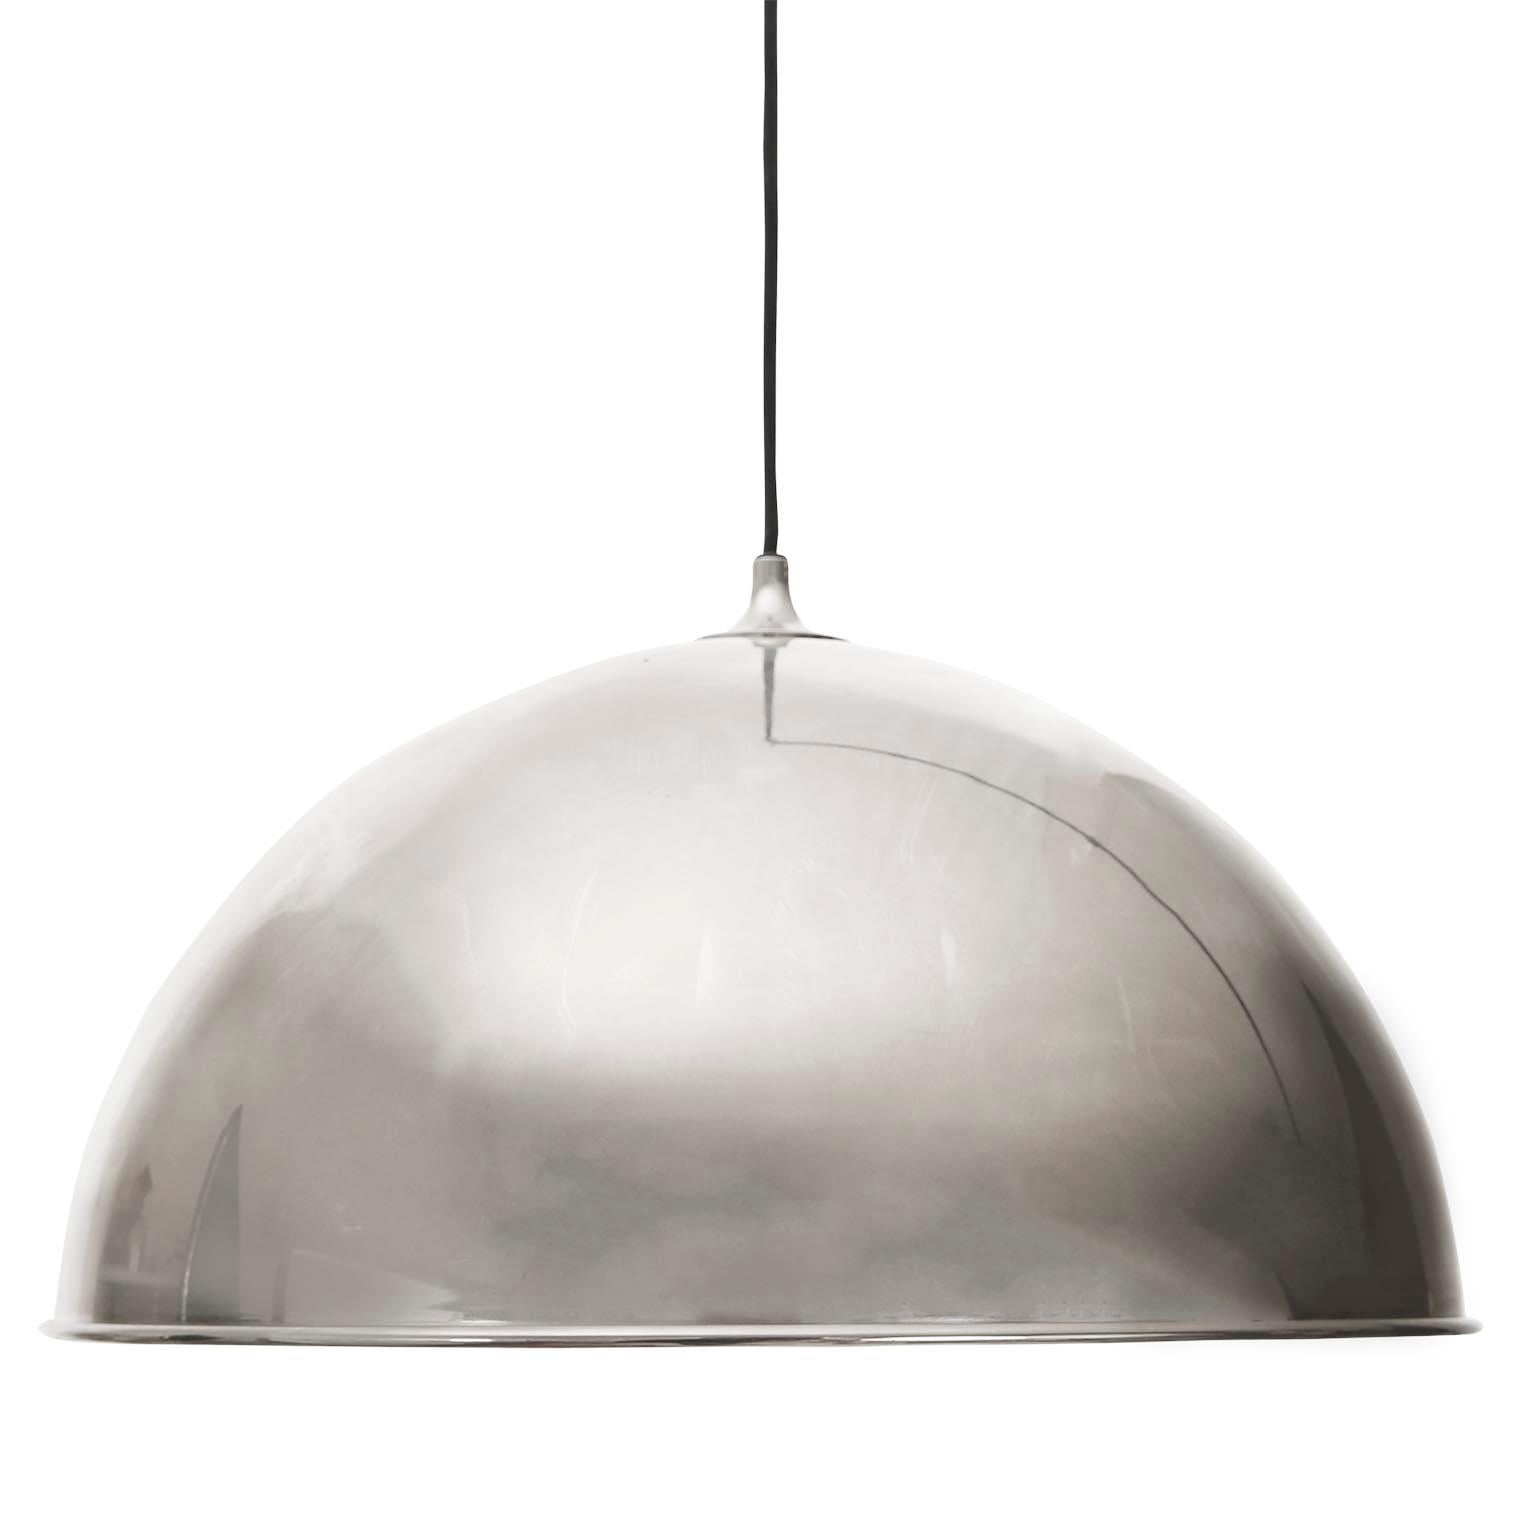 Mid-Century Modern Florian Schulz Pendant Light Counterweight Counterbalance Patinated Nickel, 1970 For Sale